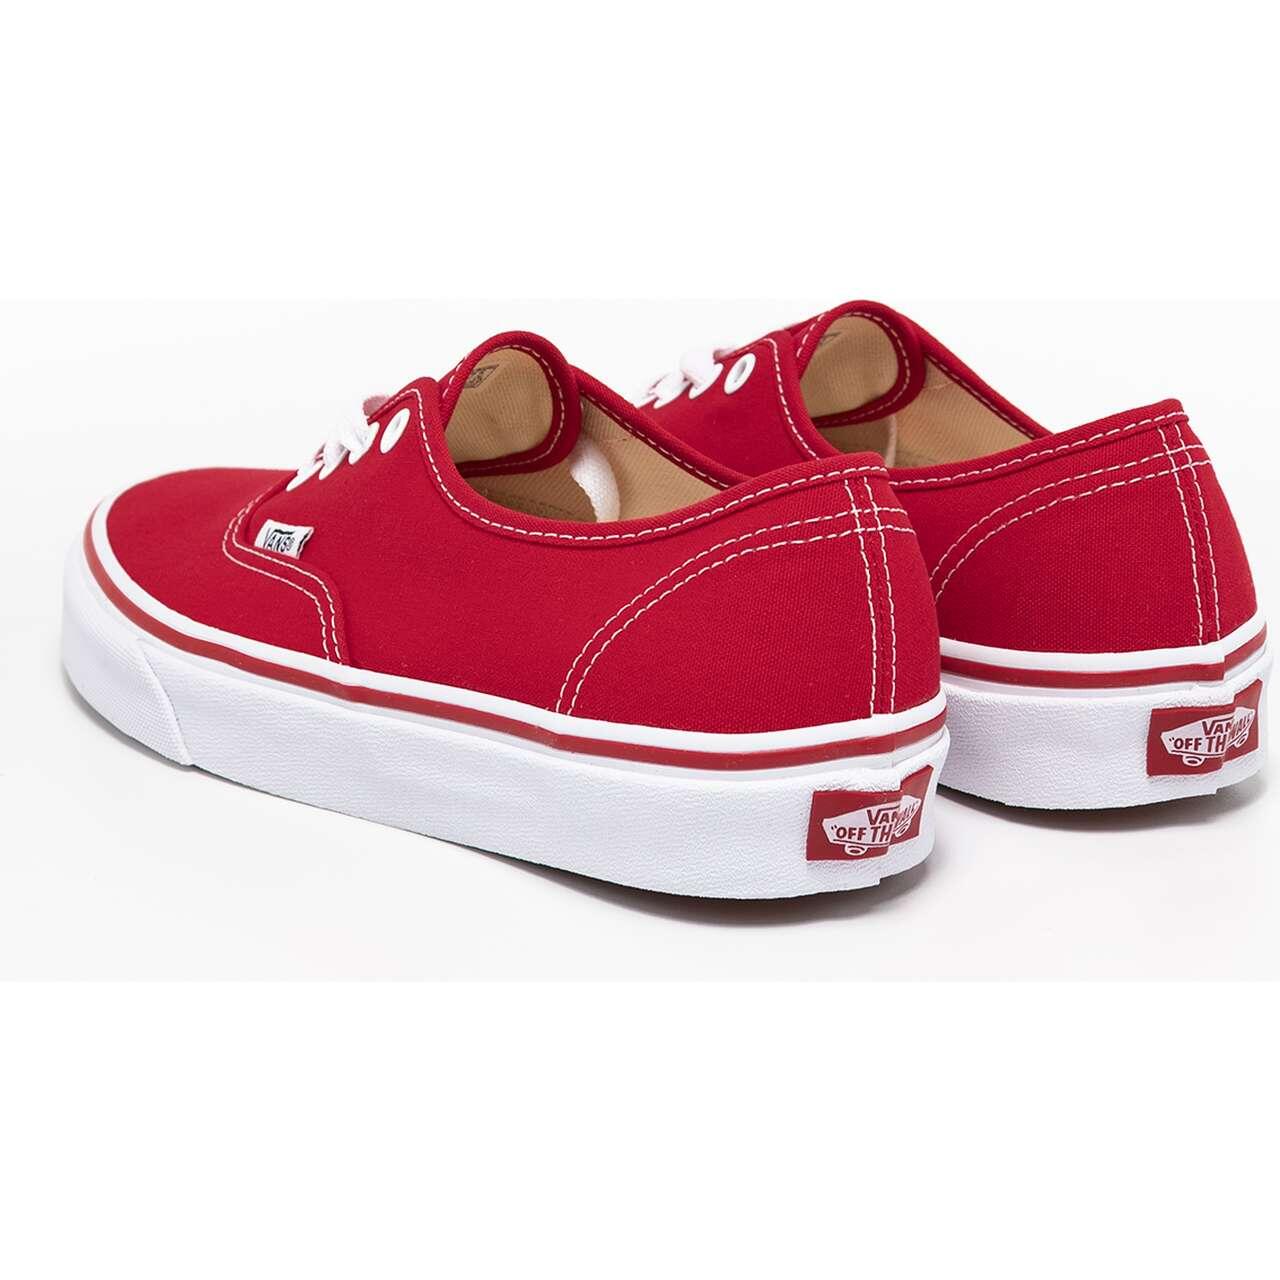 Authentic Red Shoe EE3RED 6/6